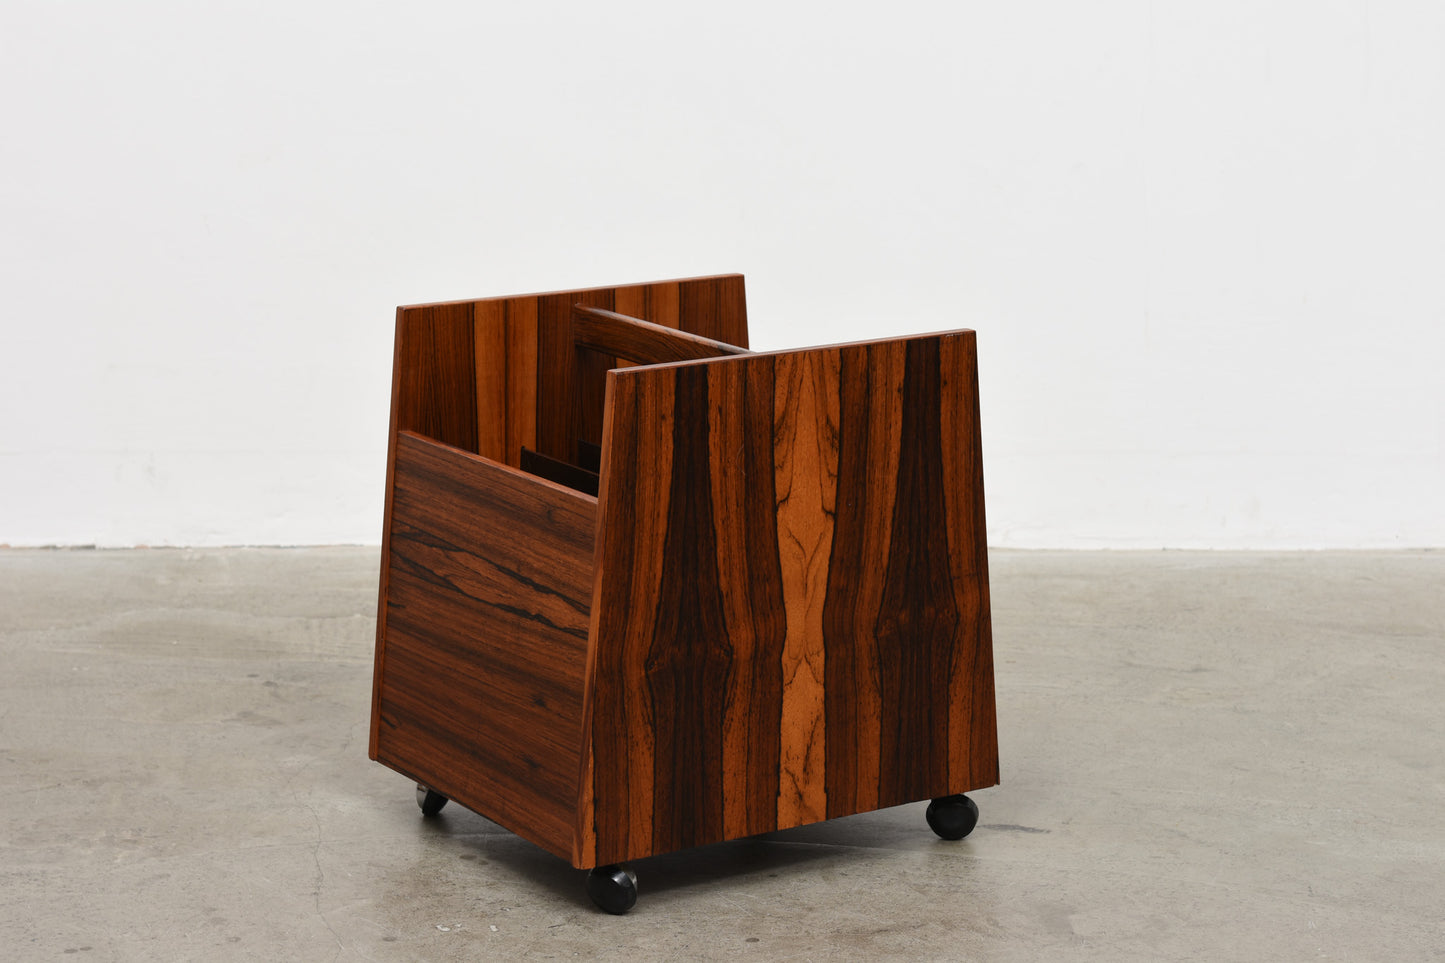 1960s rosewood magazine/record holder by Rolf Hesland